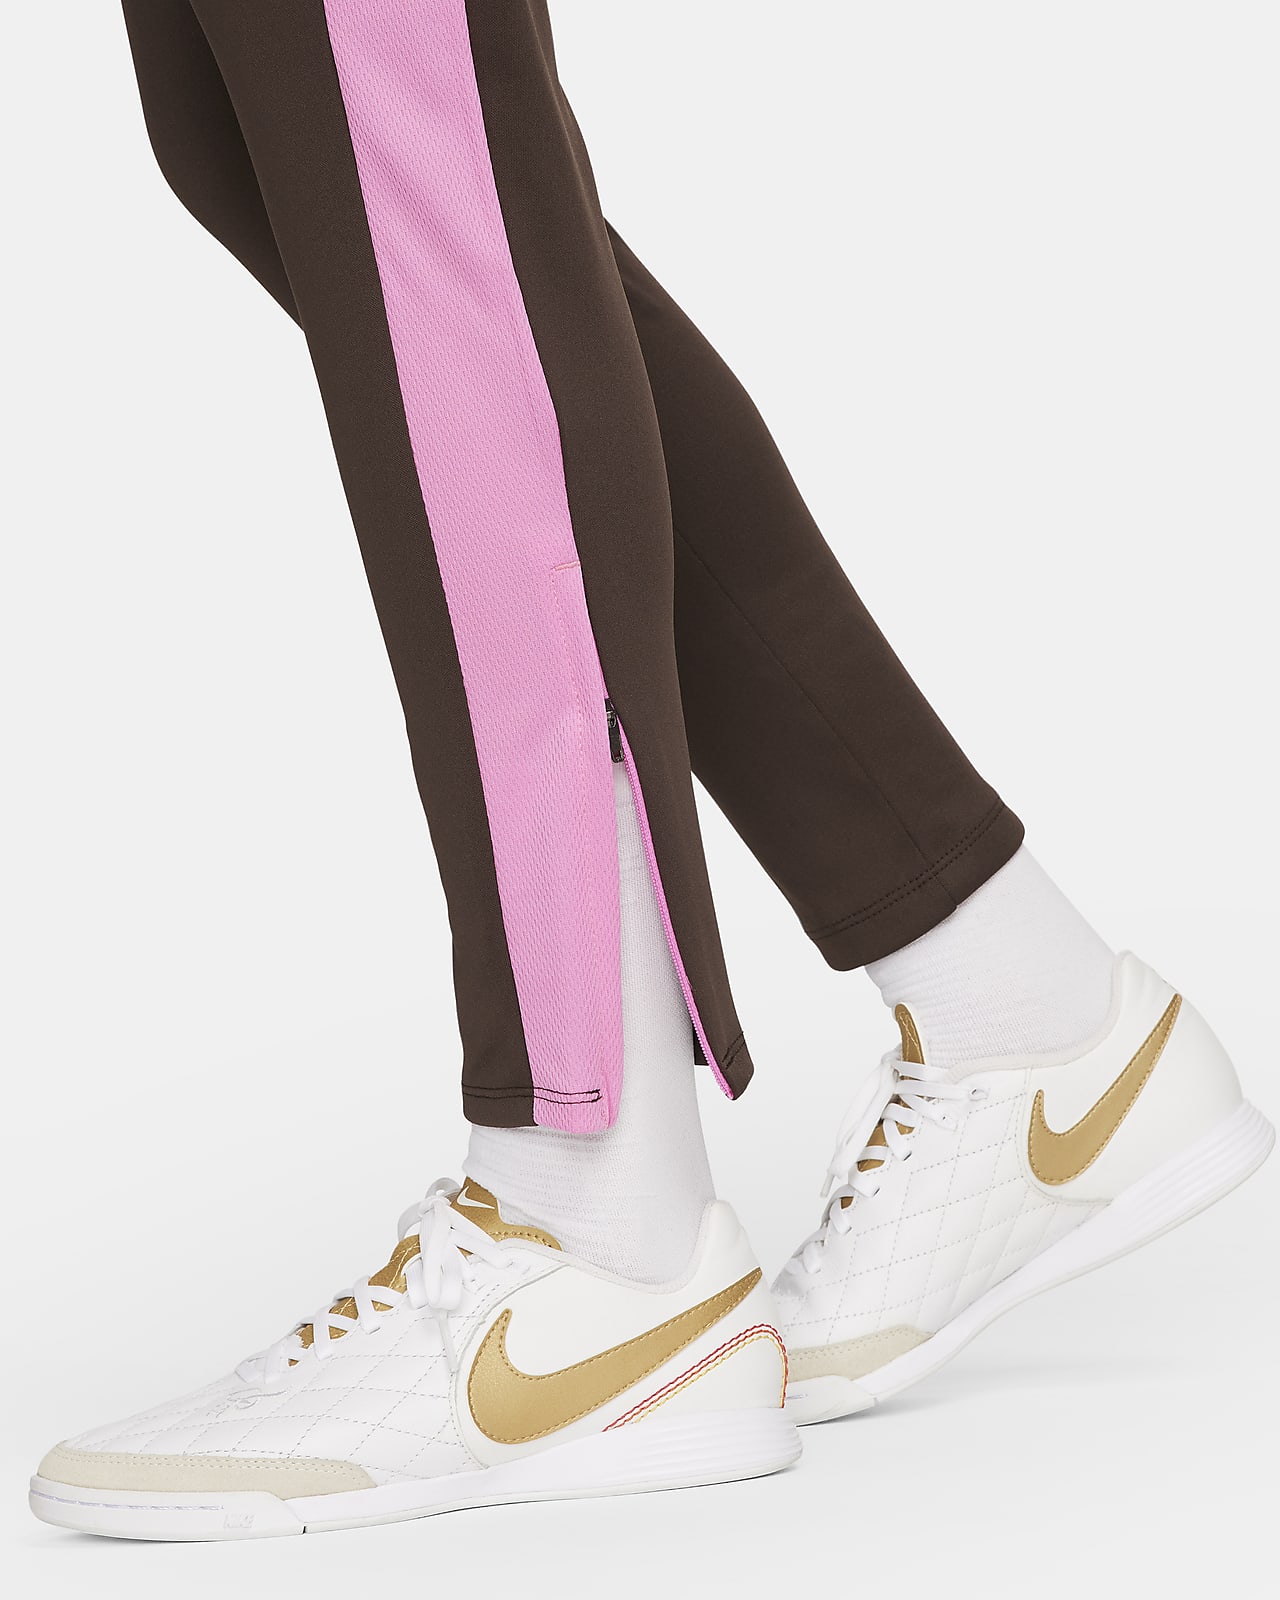 Nike Women's Dry-Fit Academy 23 Pant Kpz